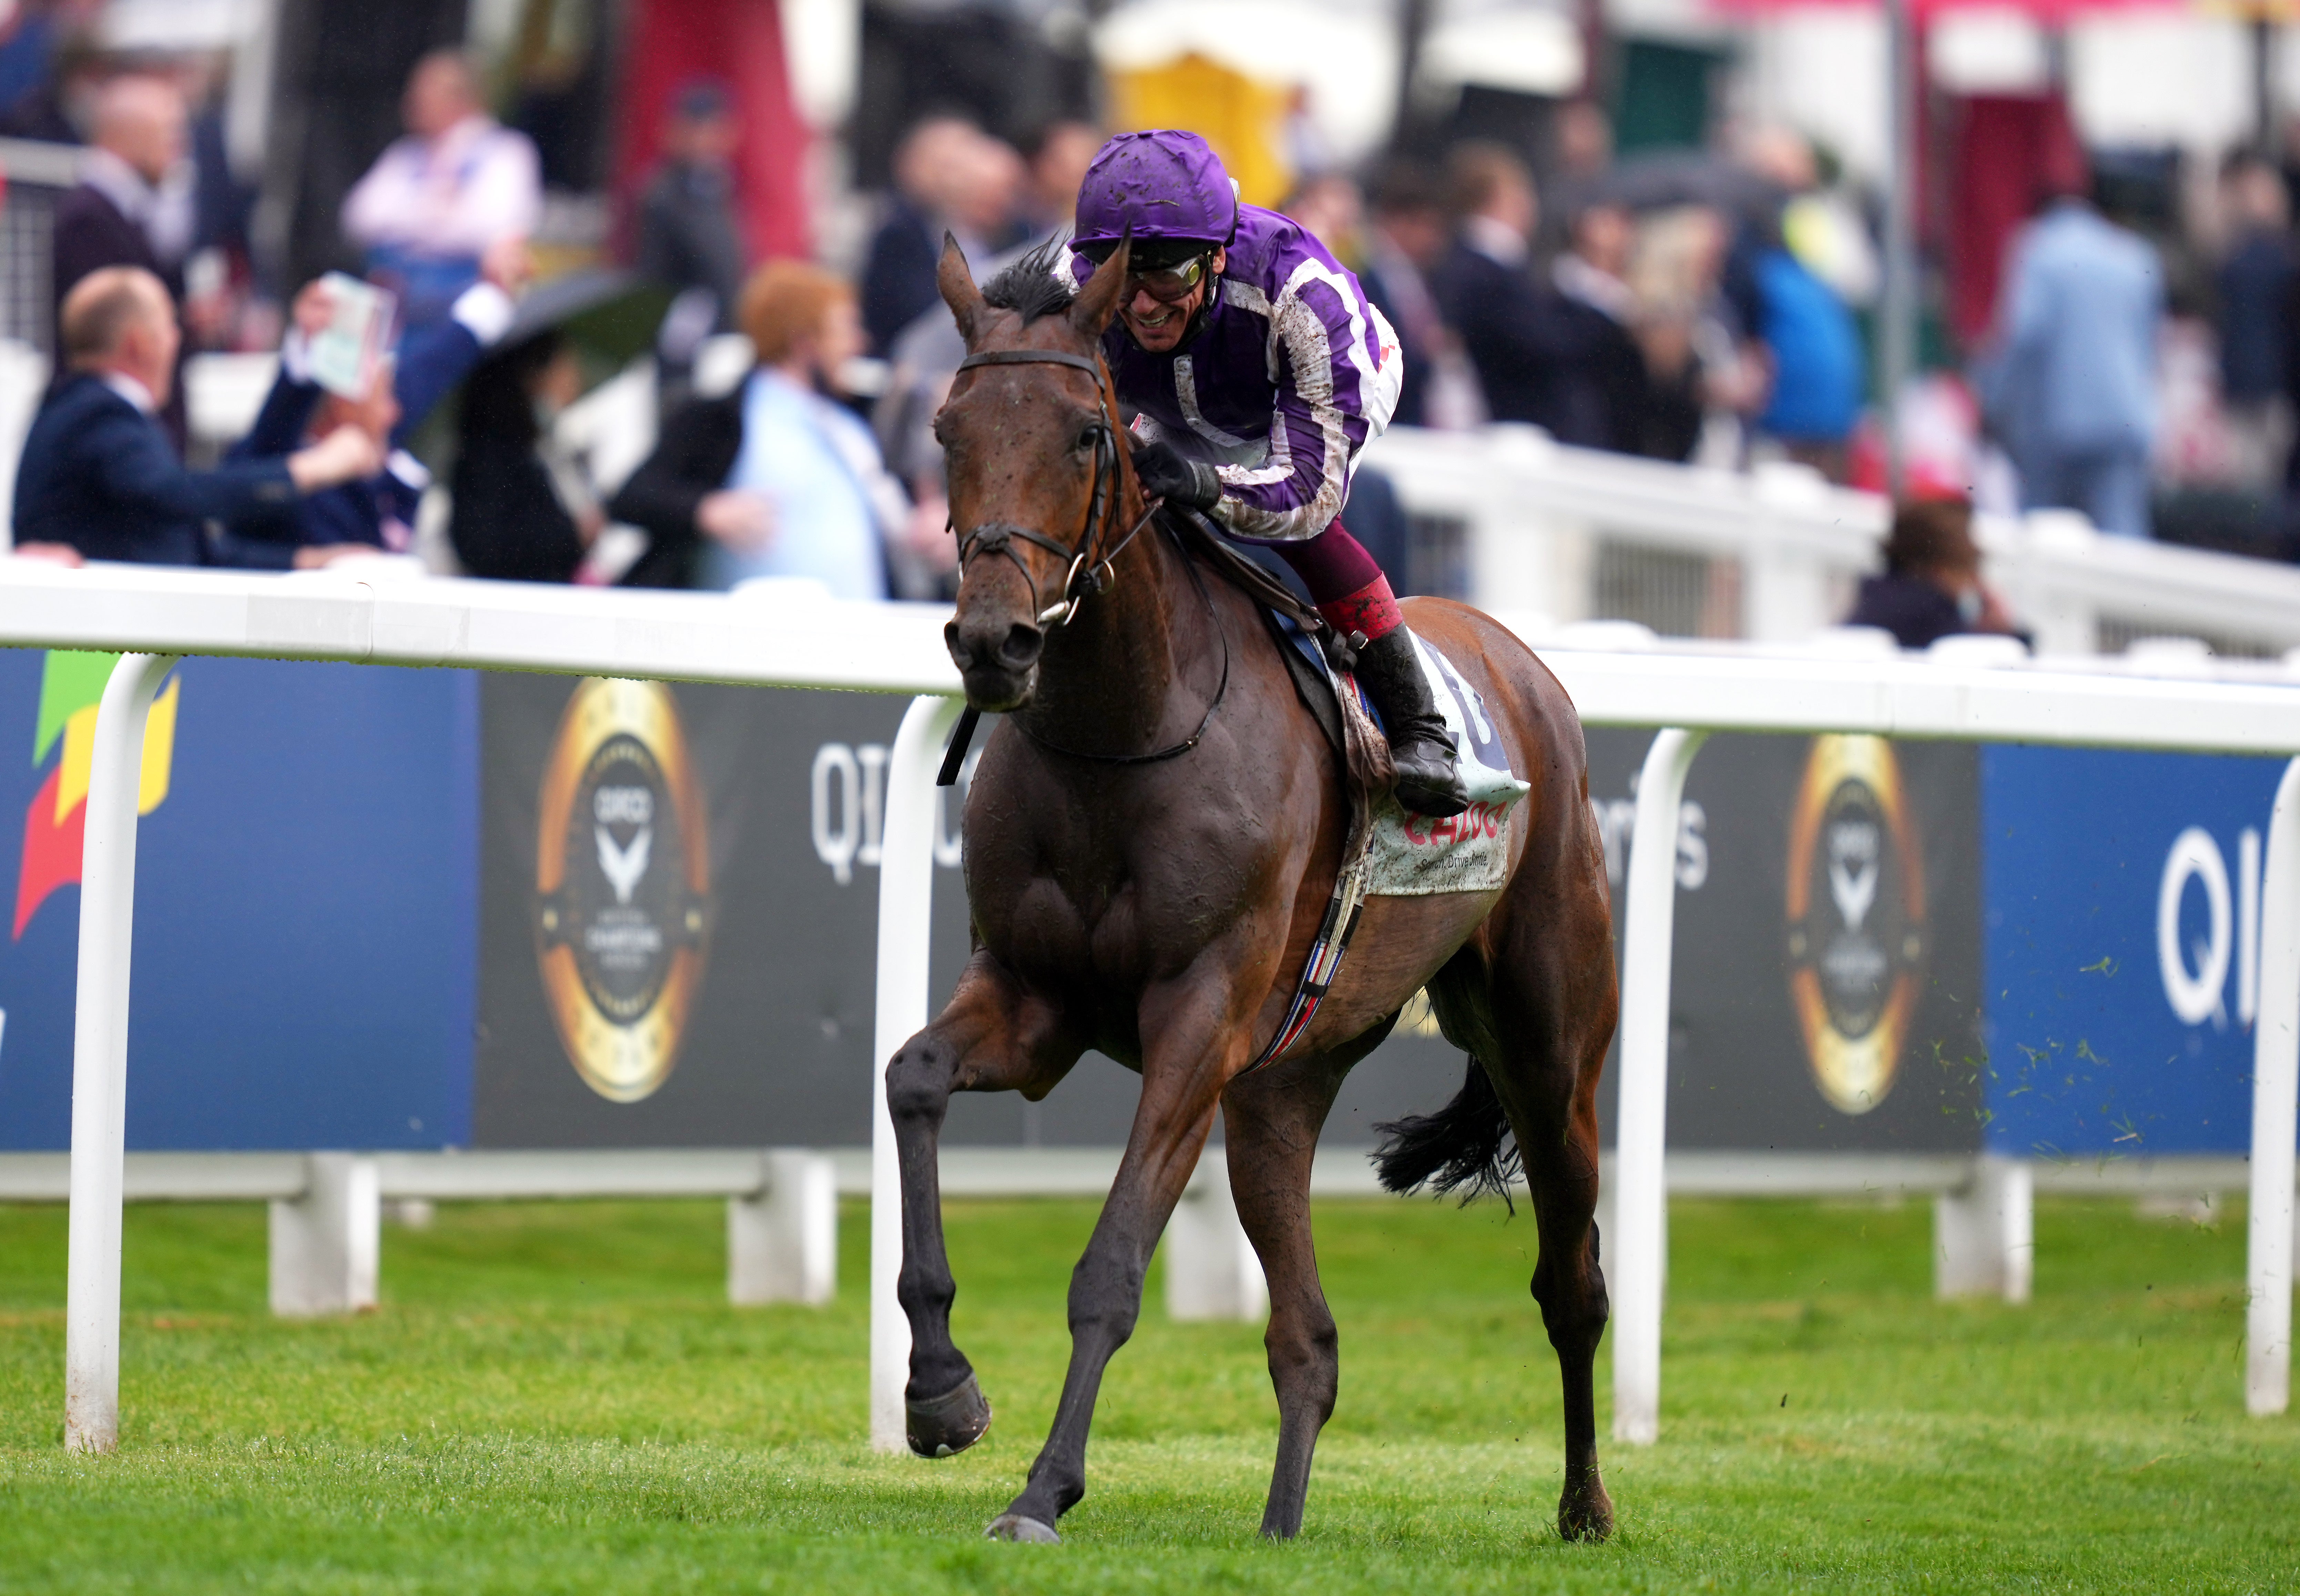 Snowfall and Frankie Dettori were record-breaking winners in the Cazoo Oaks at Epsom